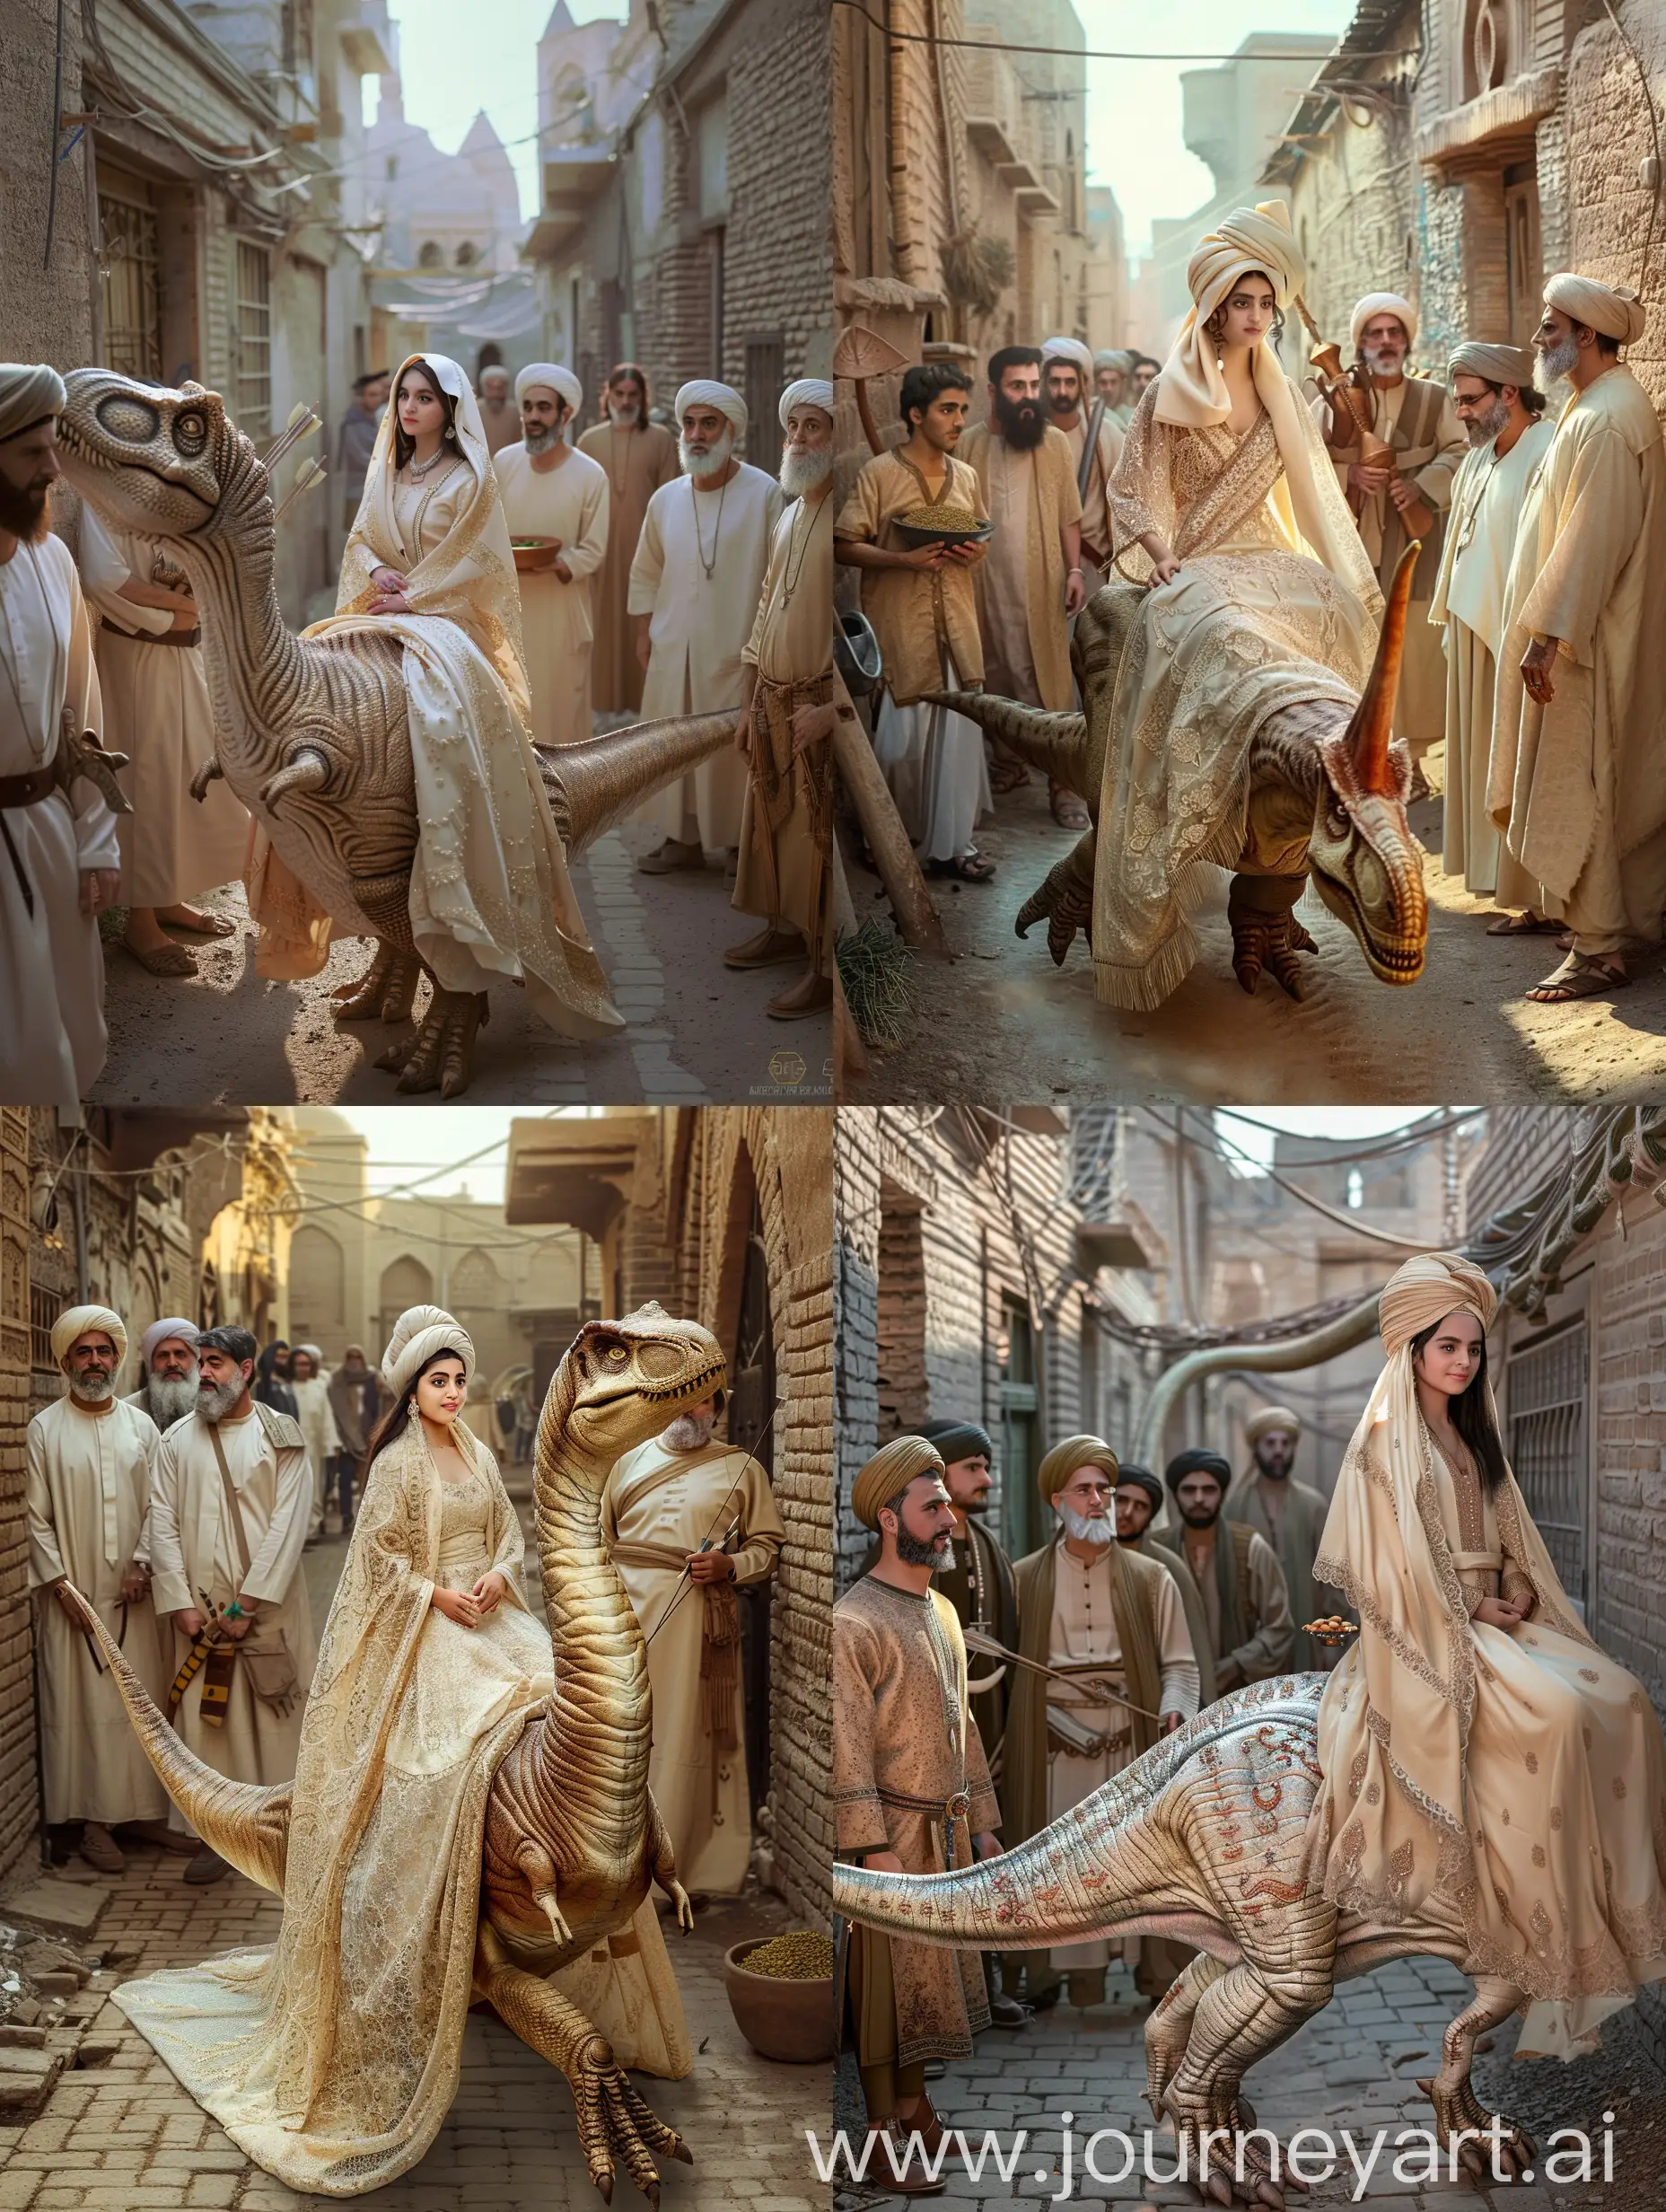 A beautiful young Persian woman in a traditional cream dress and a cream shawl on her head is riding a dinosaur going to the castle in the Bam citadel in the Persian Empire, she is riding the dinosaur in an alley, and in that alley is a middle-aged man with a white beard and a traditional Persian dress of ancient Iran and a hat in the shape of a lion's head among seven 30-year-old men (a man with a beard and ancient blacksmith's clothes, a man with a beard and a bow and archer's clothes, a man with a beard and clothes Traditional Persian, a man with a beard and traditional Persian clothes and a sword in a scabbard around his waist and a man with three strings on his back and a man in traditional Persian clothes and a bowl of pistachio powder in it, holding it in his hand and with a man in traditional dress and holding a rosary) they look seriously at the young girl riding the dinosaur and send her away, and the young girl riding the dinosaur sits on the dinosaur while saying goodbye to the men. Make me a real HD photo with fine details and sunny lighting, great quality Make me a real photo with fine details and midday light